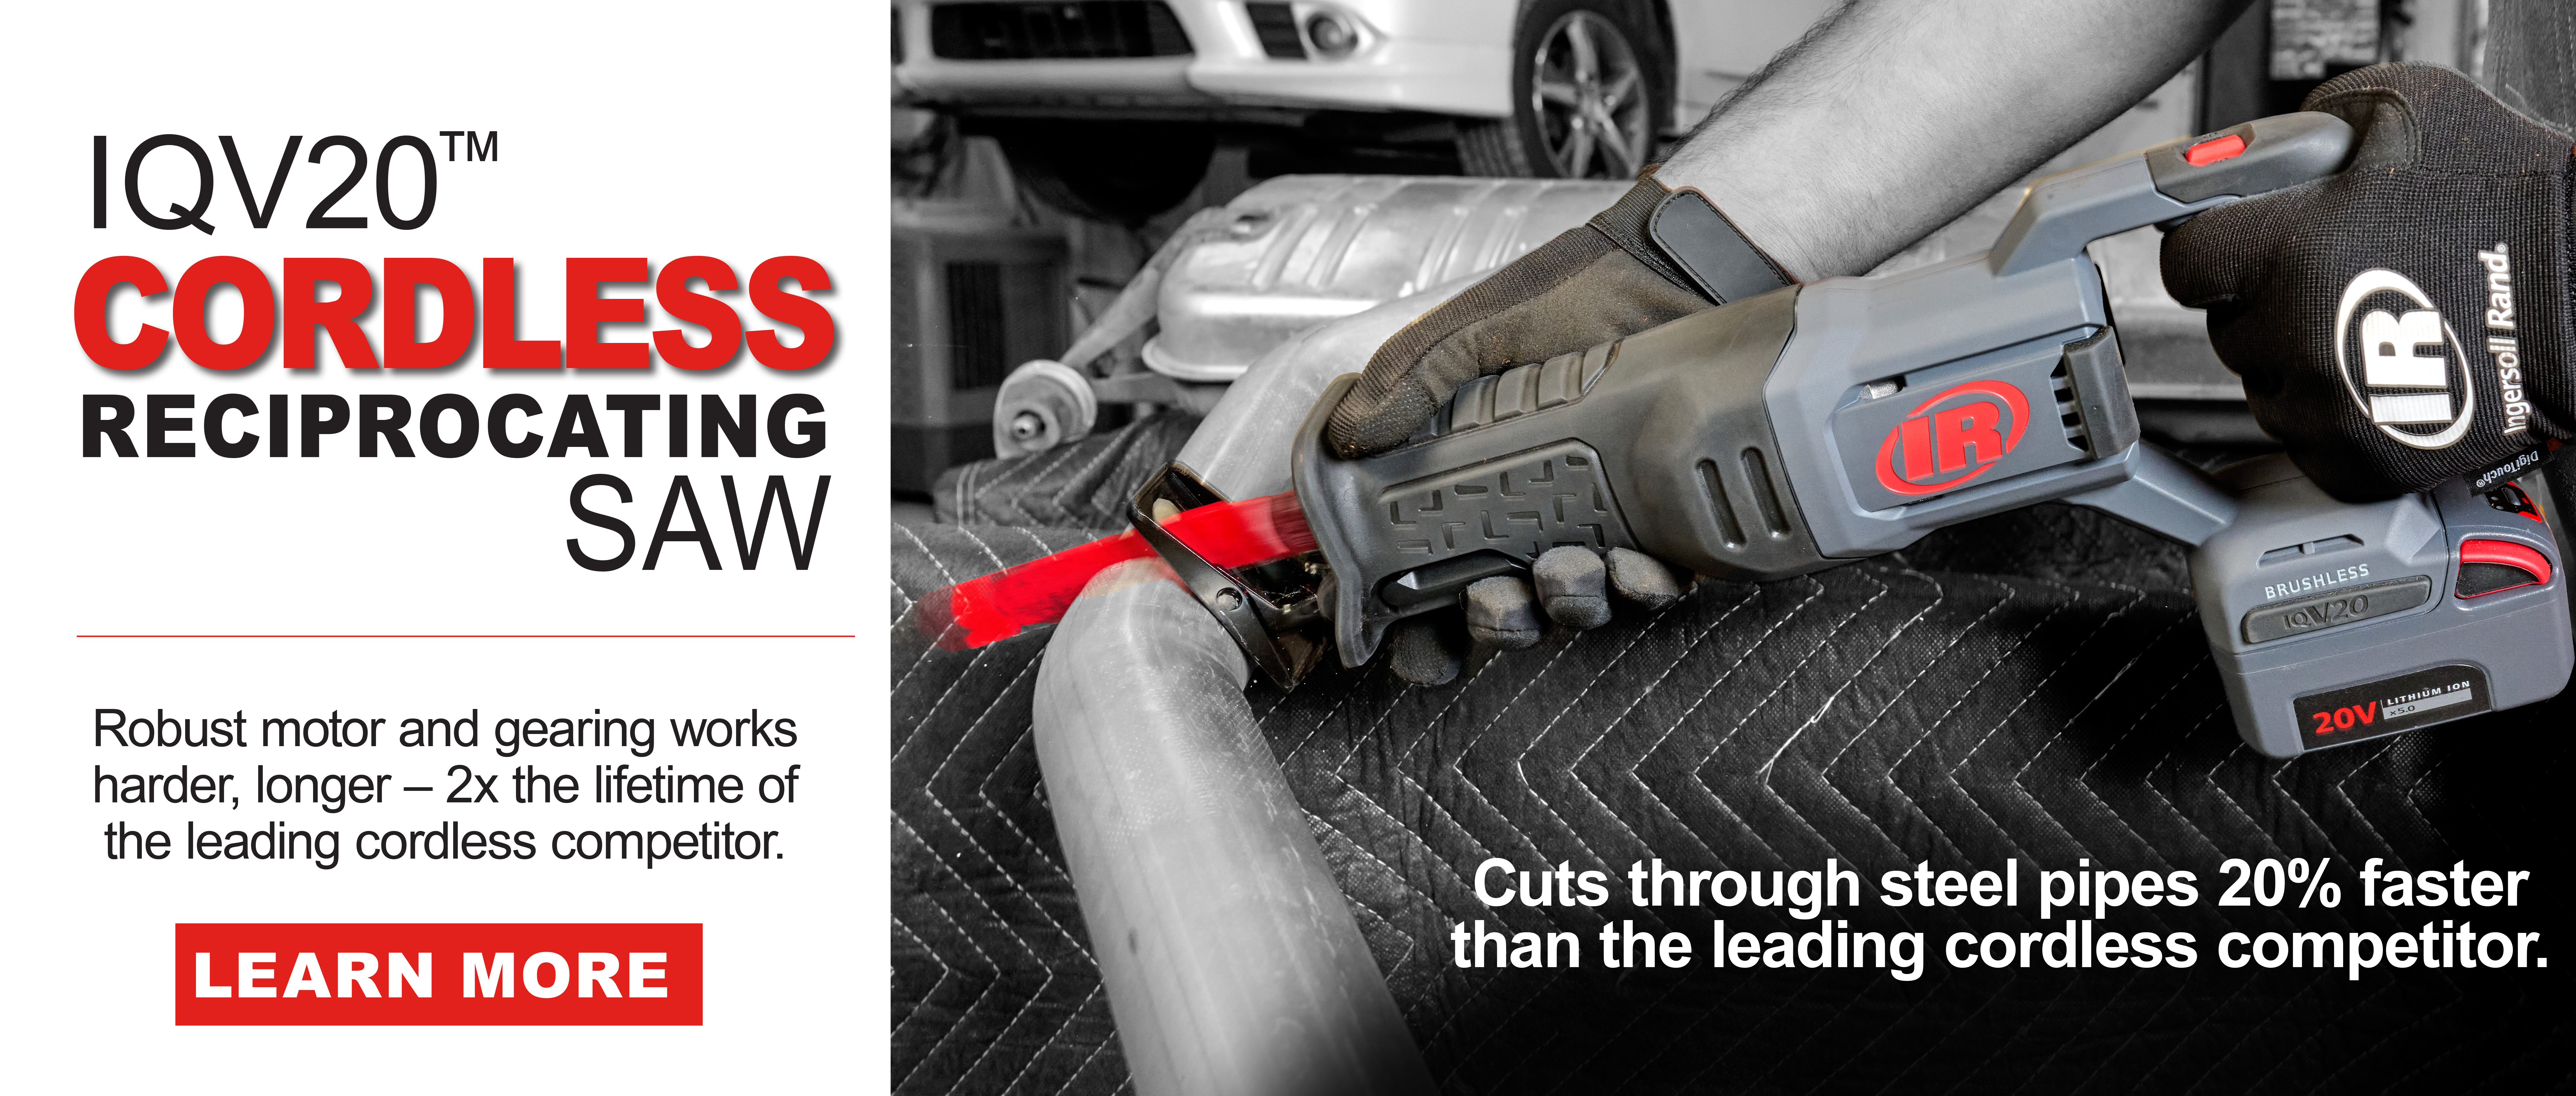 Ingersoll Rand Cordless Reciprocating Saw offers a robust motor and gearing that works harder and longer. Durable and long-lasting cordless recip saw.